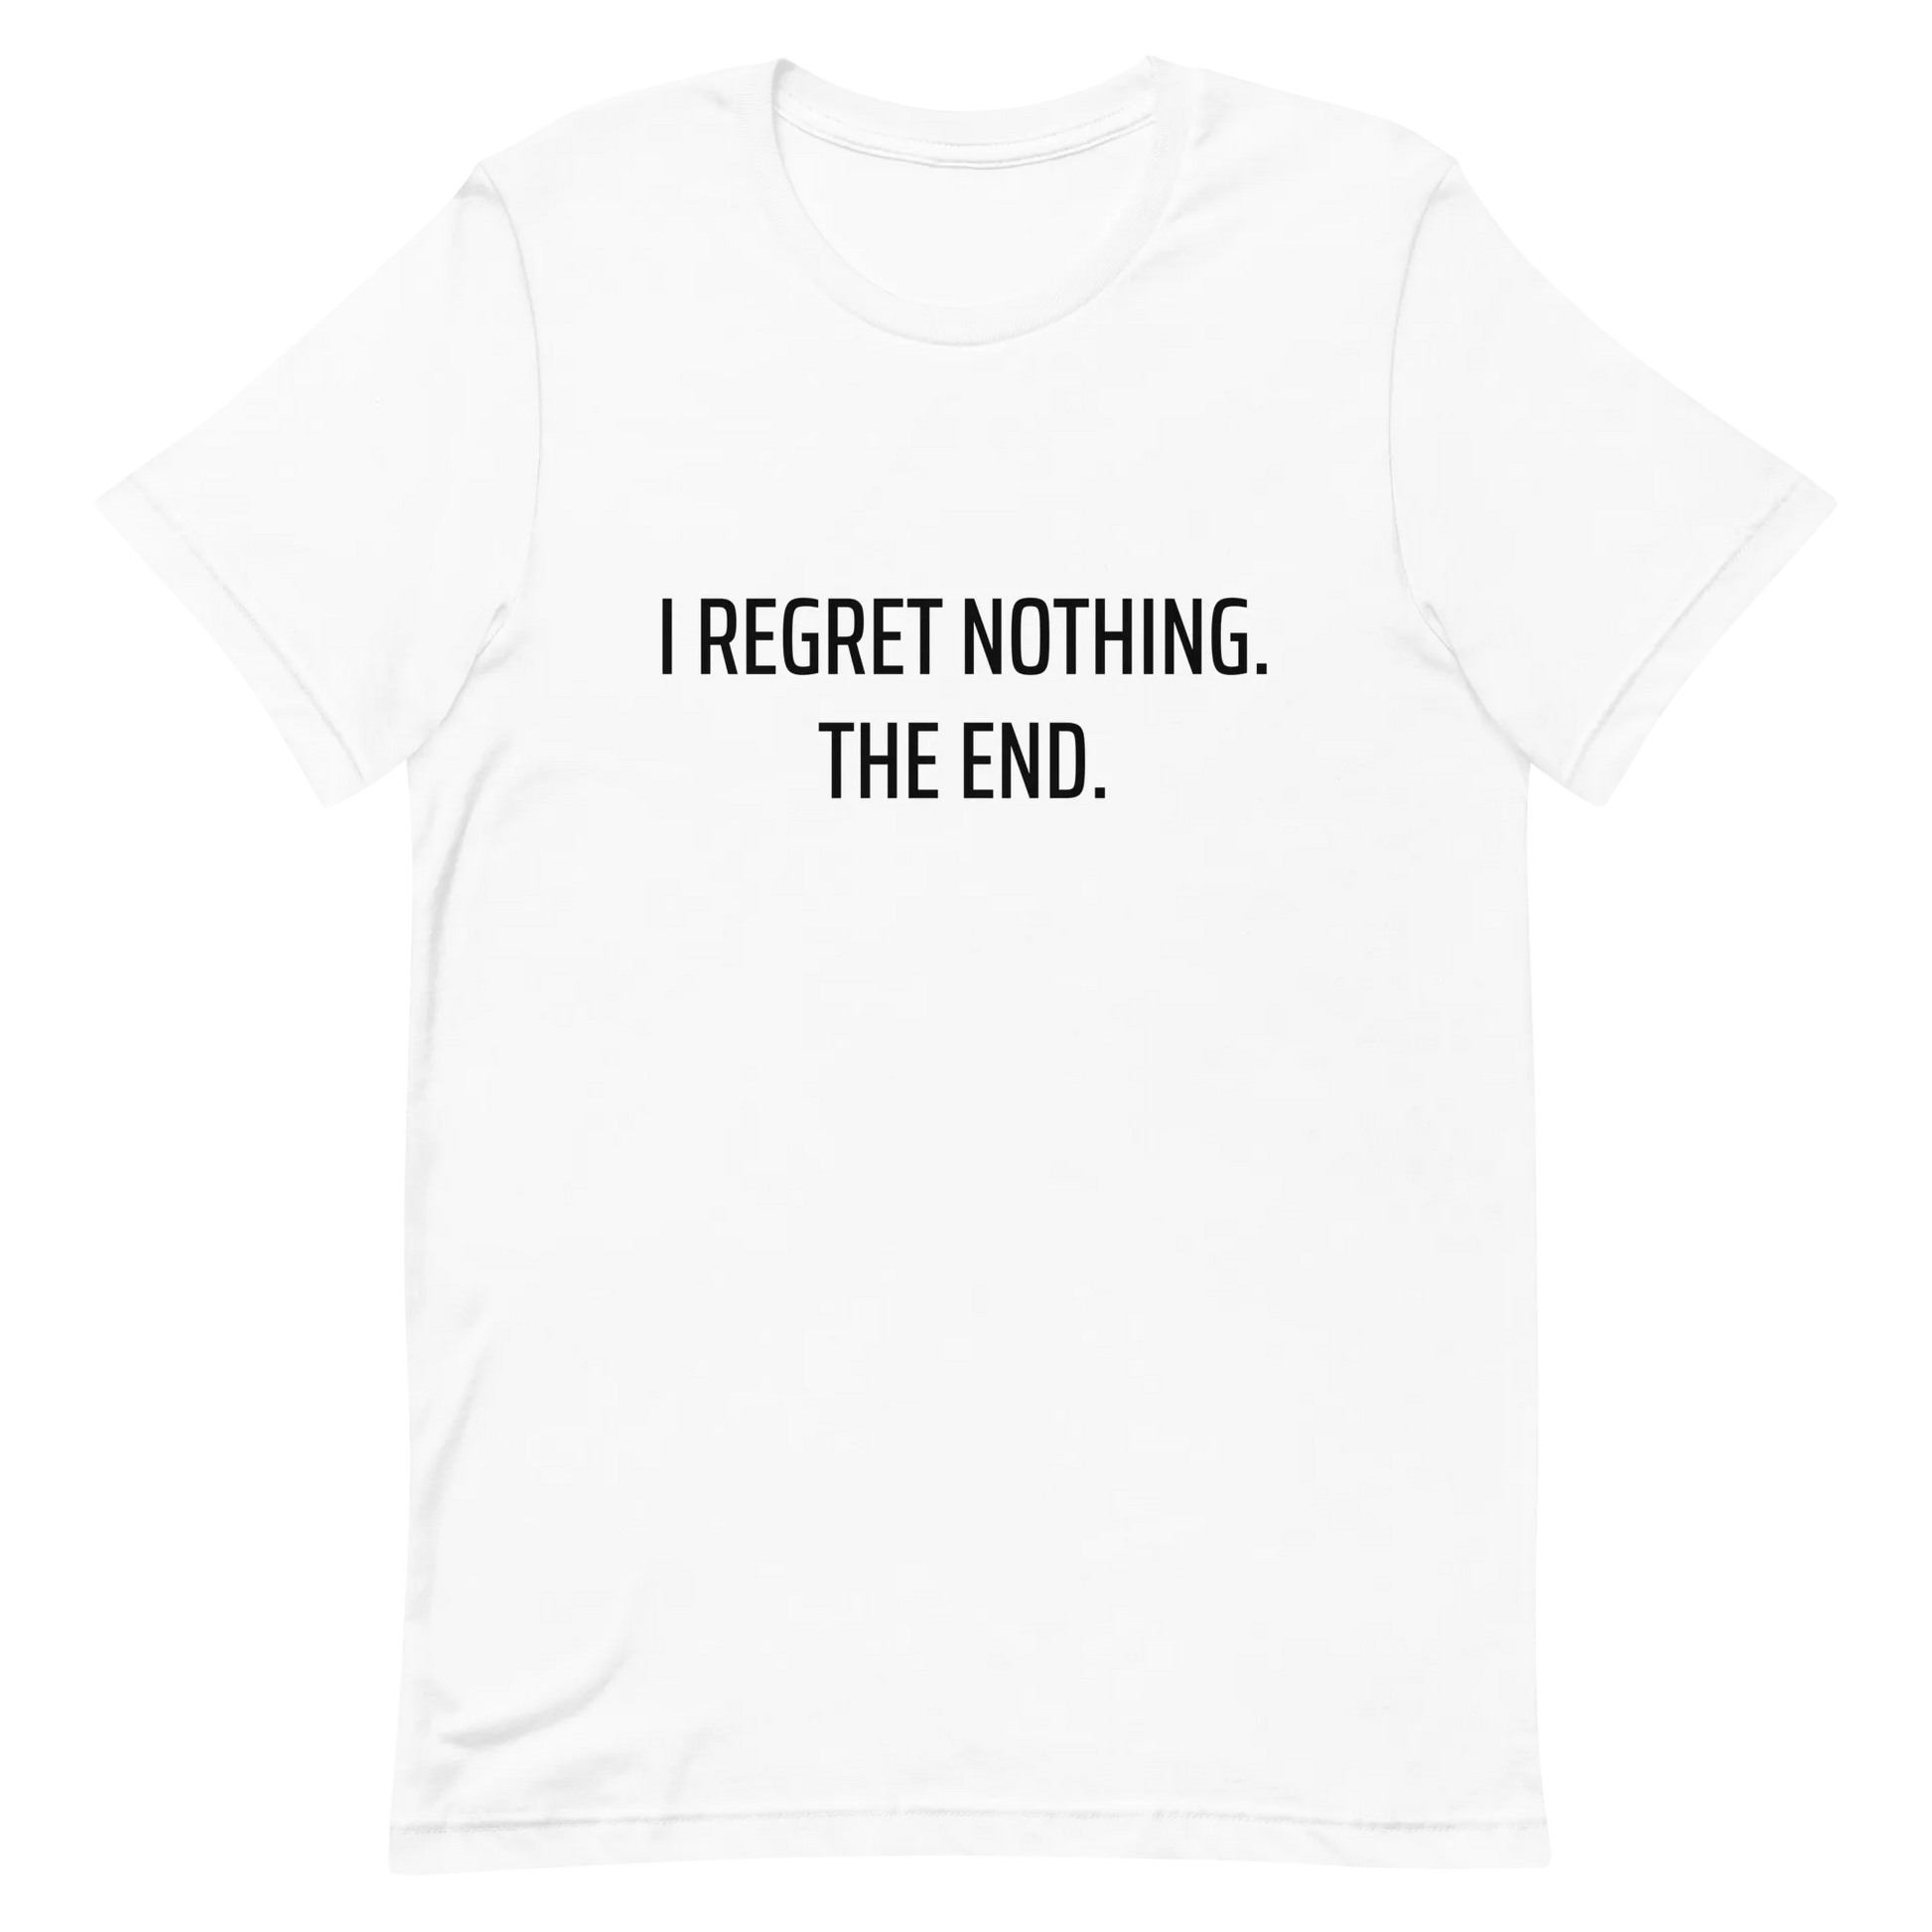 I Regret Nothing Tee in White flatlay